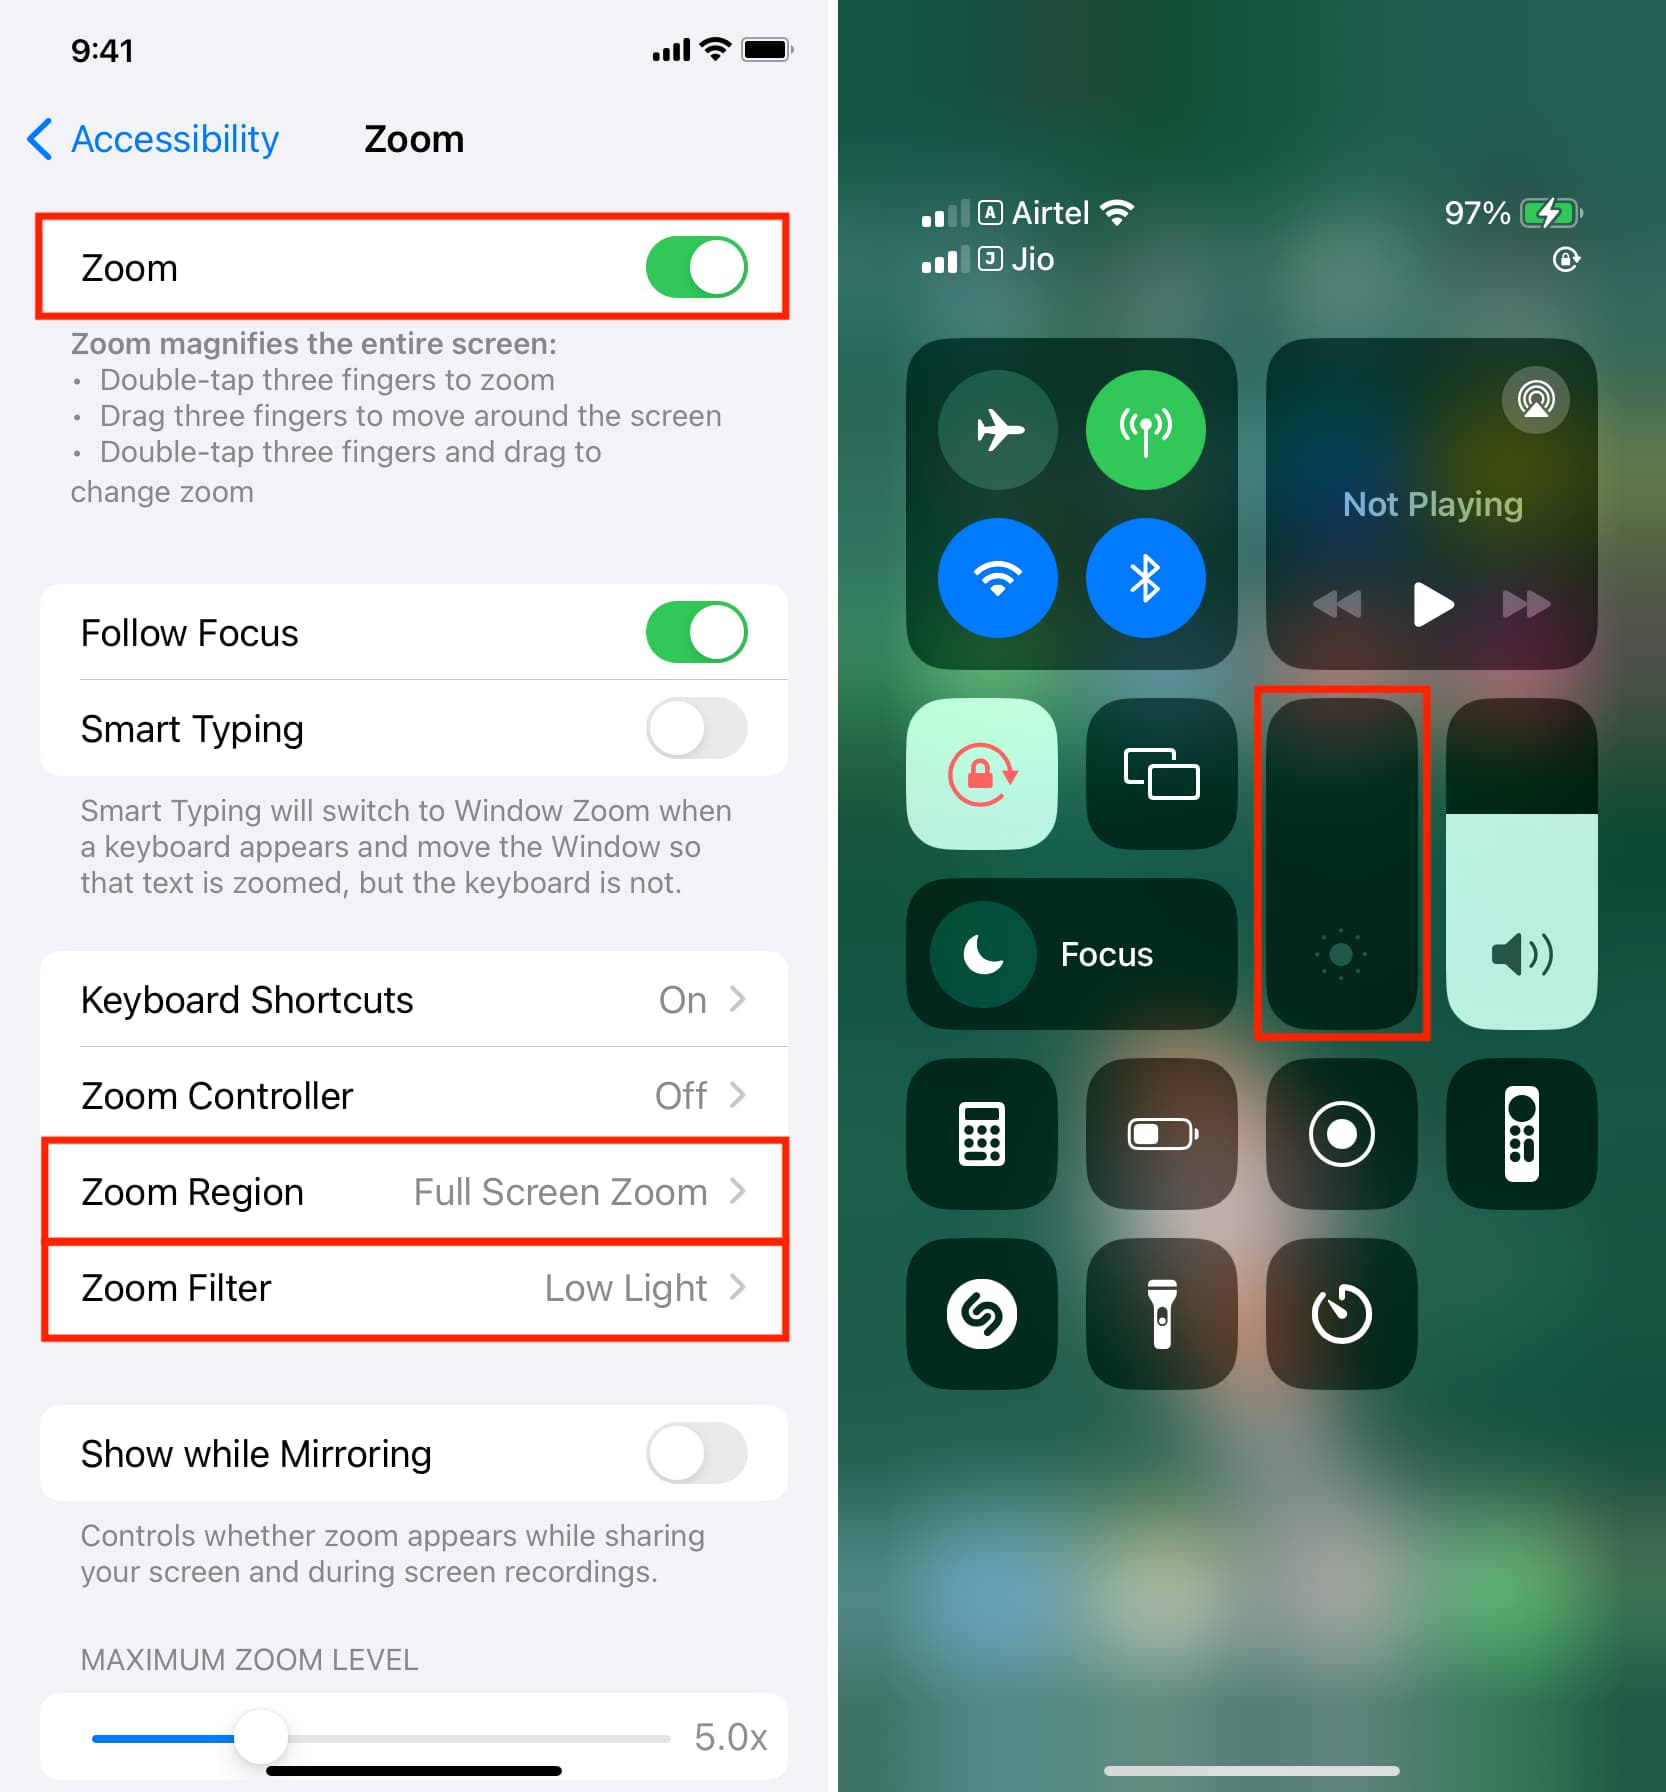 Use Zoom accessibility feature to further lower iPhone screen brightness